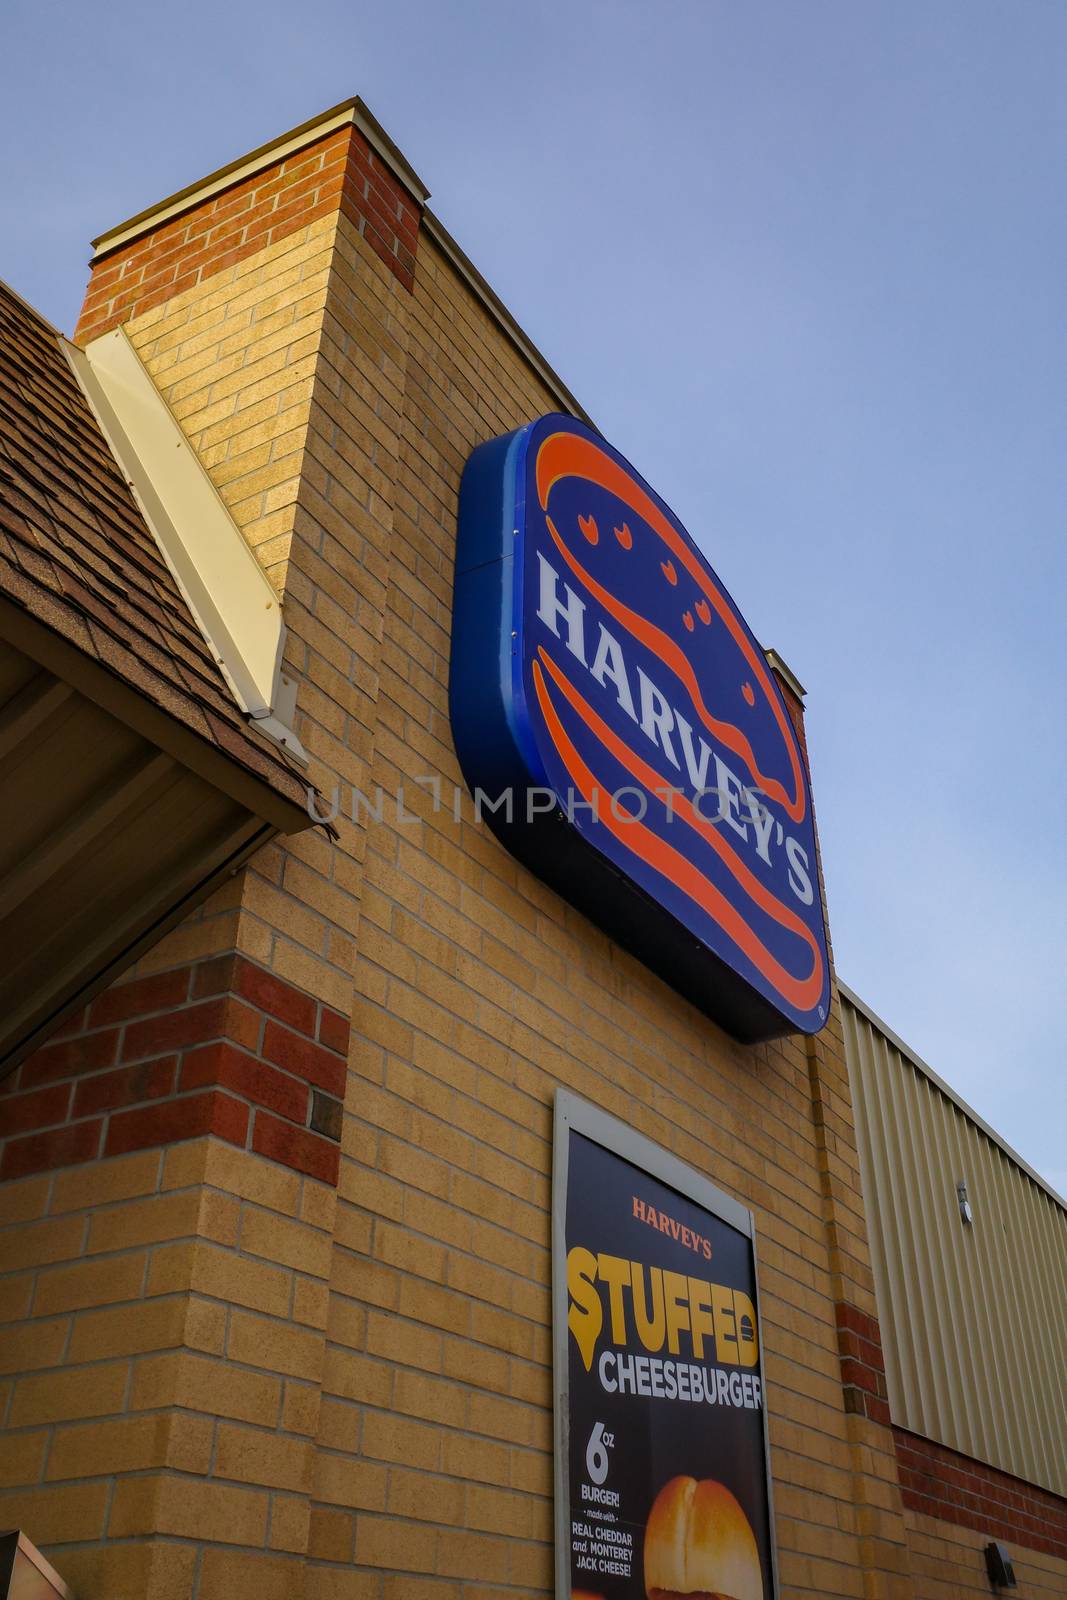 Harvey's fast food restaurant sign in Ottawa by colintemple